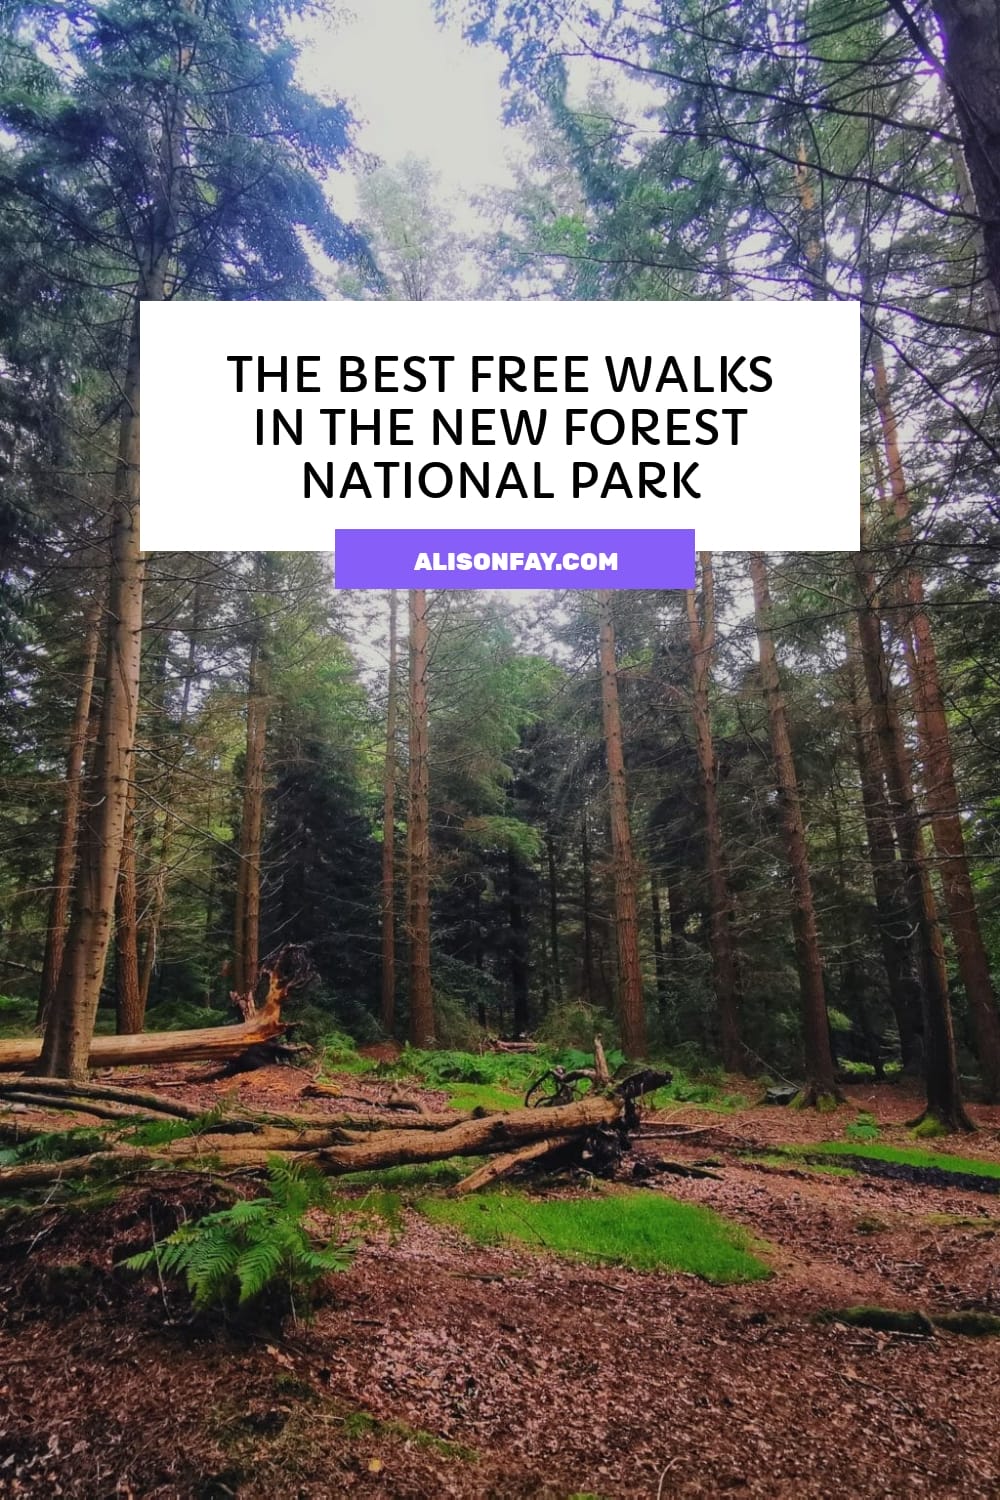 The Best Free Walks in the New Forest National Park